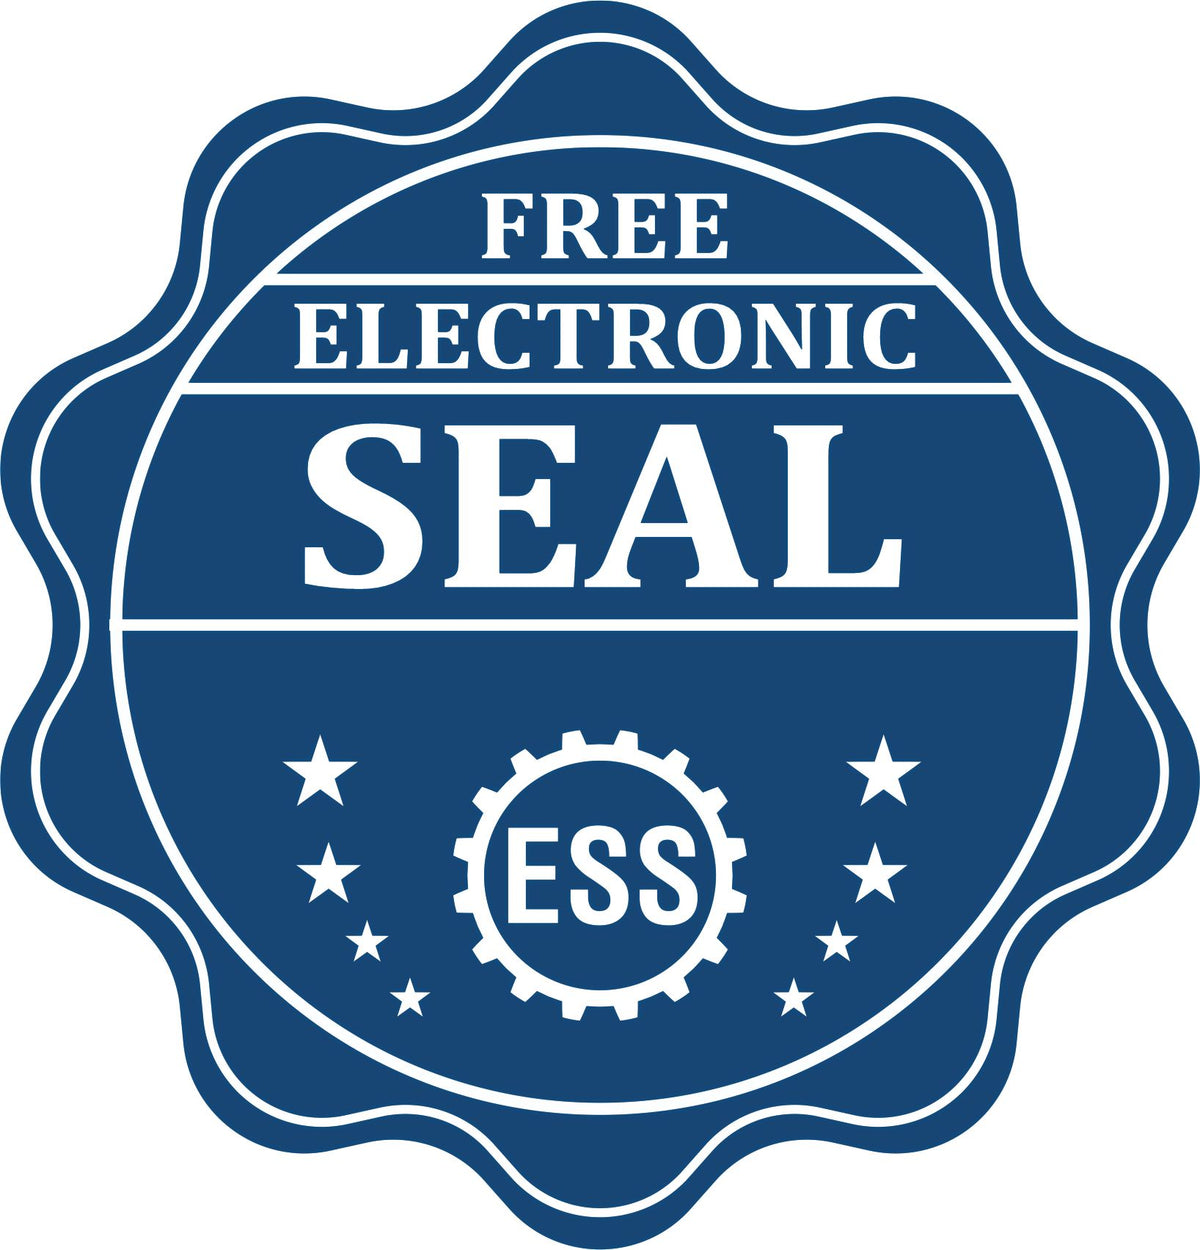 A badge showing a free electronic seal for the Slim Pre-Inked Wisconsin Professional Geologist Seal Stamp with stars and the ESS gear on the emblem.